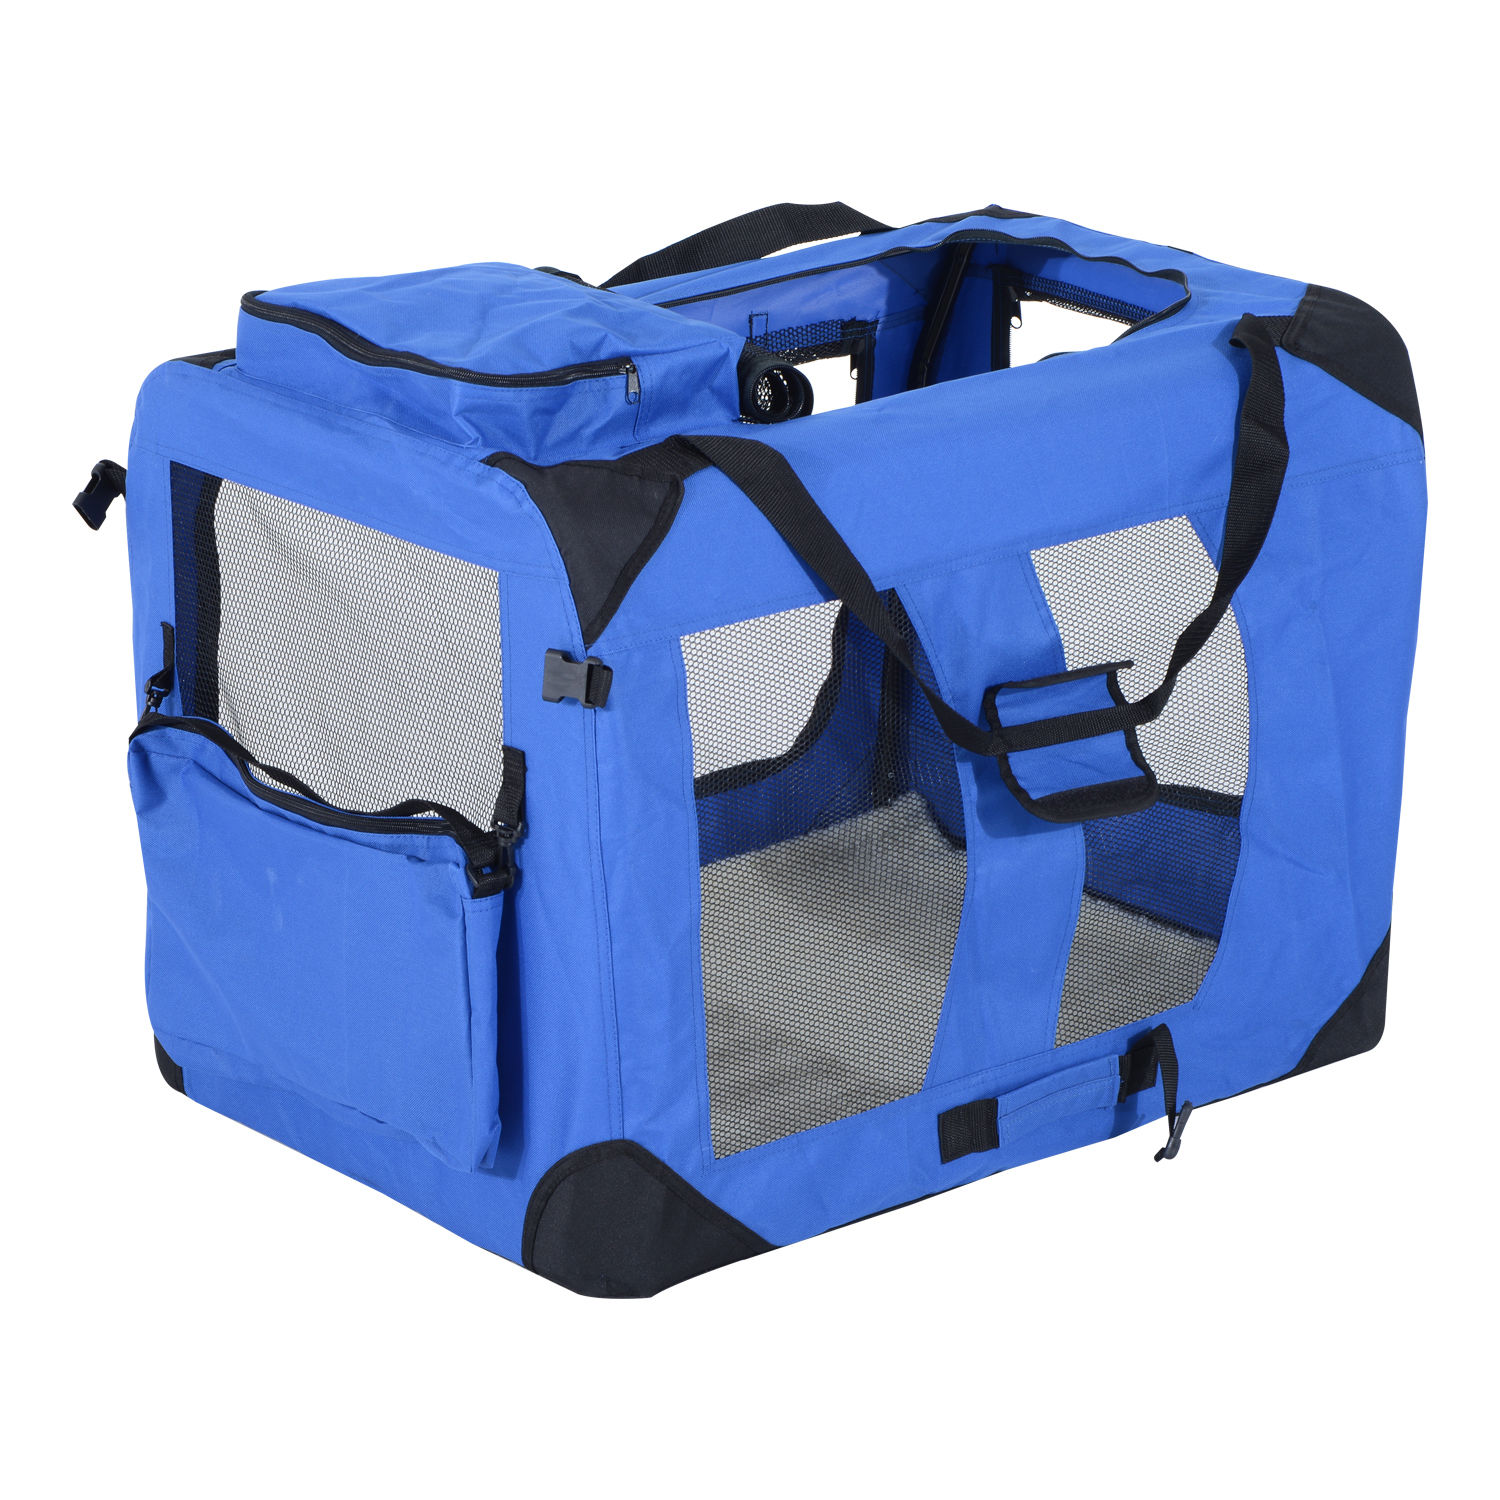 32 Inch Soft Sided Folding Crate Pet Carrier